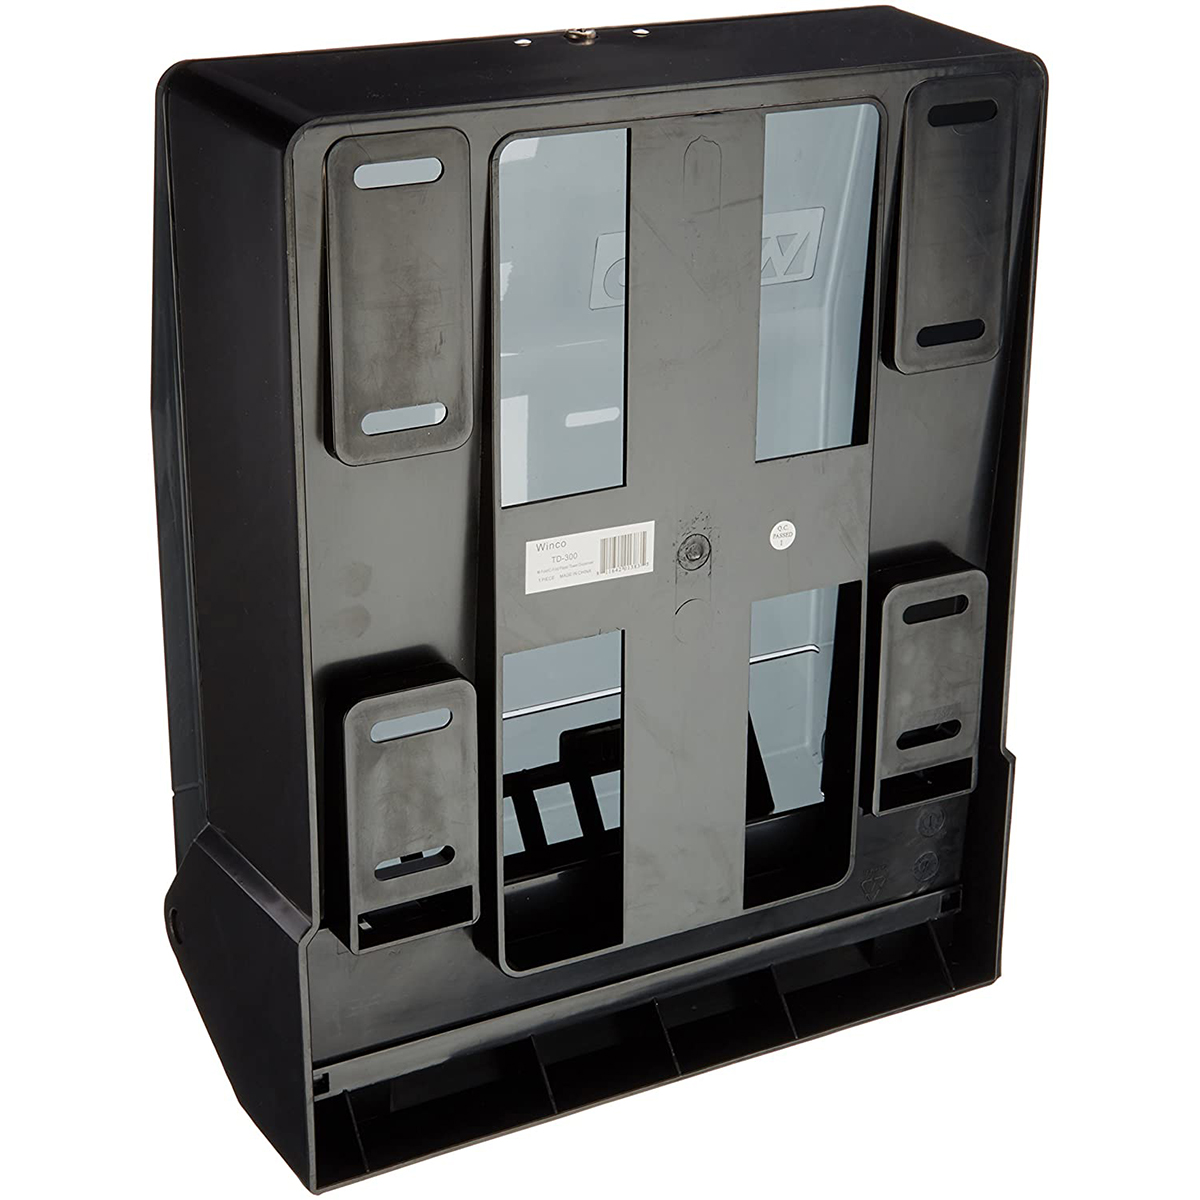 Winware by Winco TD-300 Paper Towel Dispenser image 4